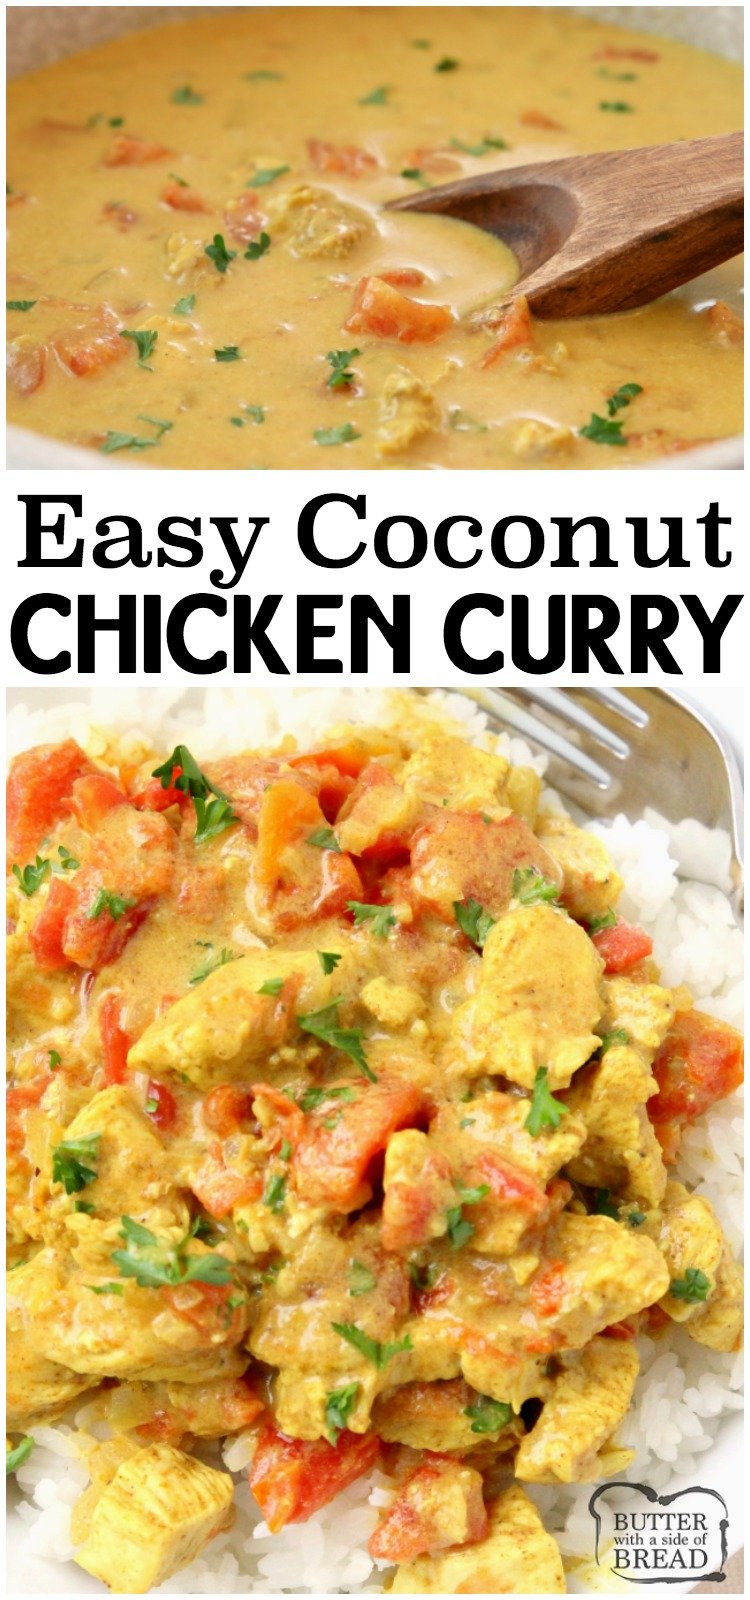 Coconut Chicken Curry recipe perfect for a busy weeknight meal! Simple, flavorful and healthy 20-minute chicken dinner for anyone who loves a mild chicken curry. Our Coconut Curry Chicken recipe uses diced chicken, tomatoes, coconut milk and just enough curry to add flavor, but not make it too spicy. It's the perfect chicken curry recipe for families!
